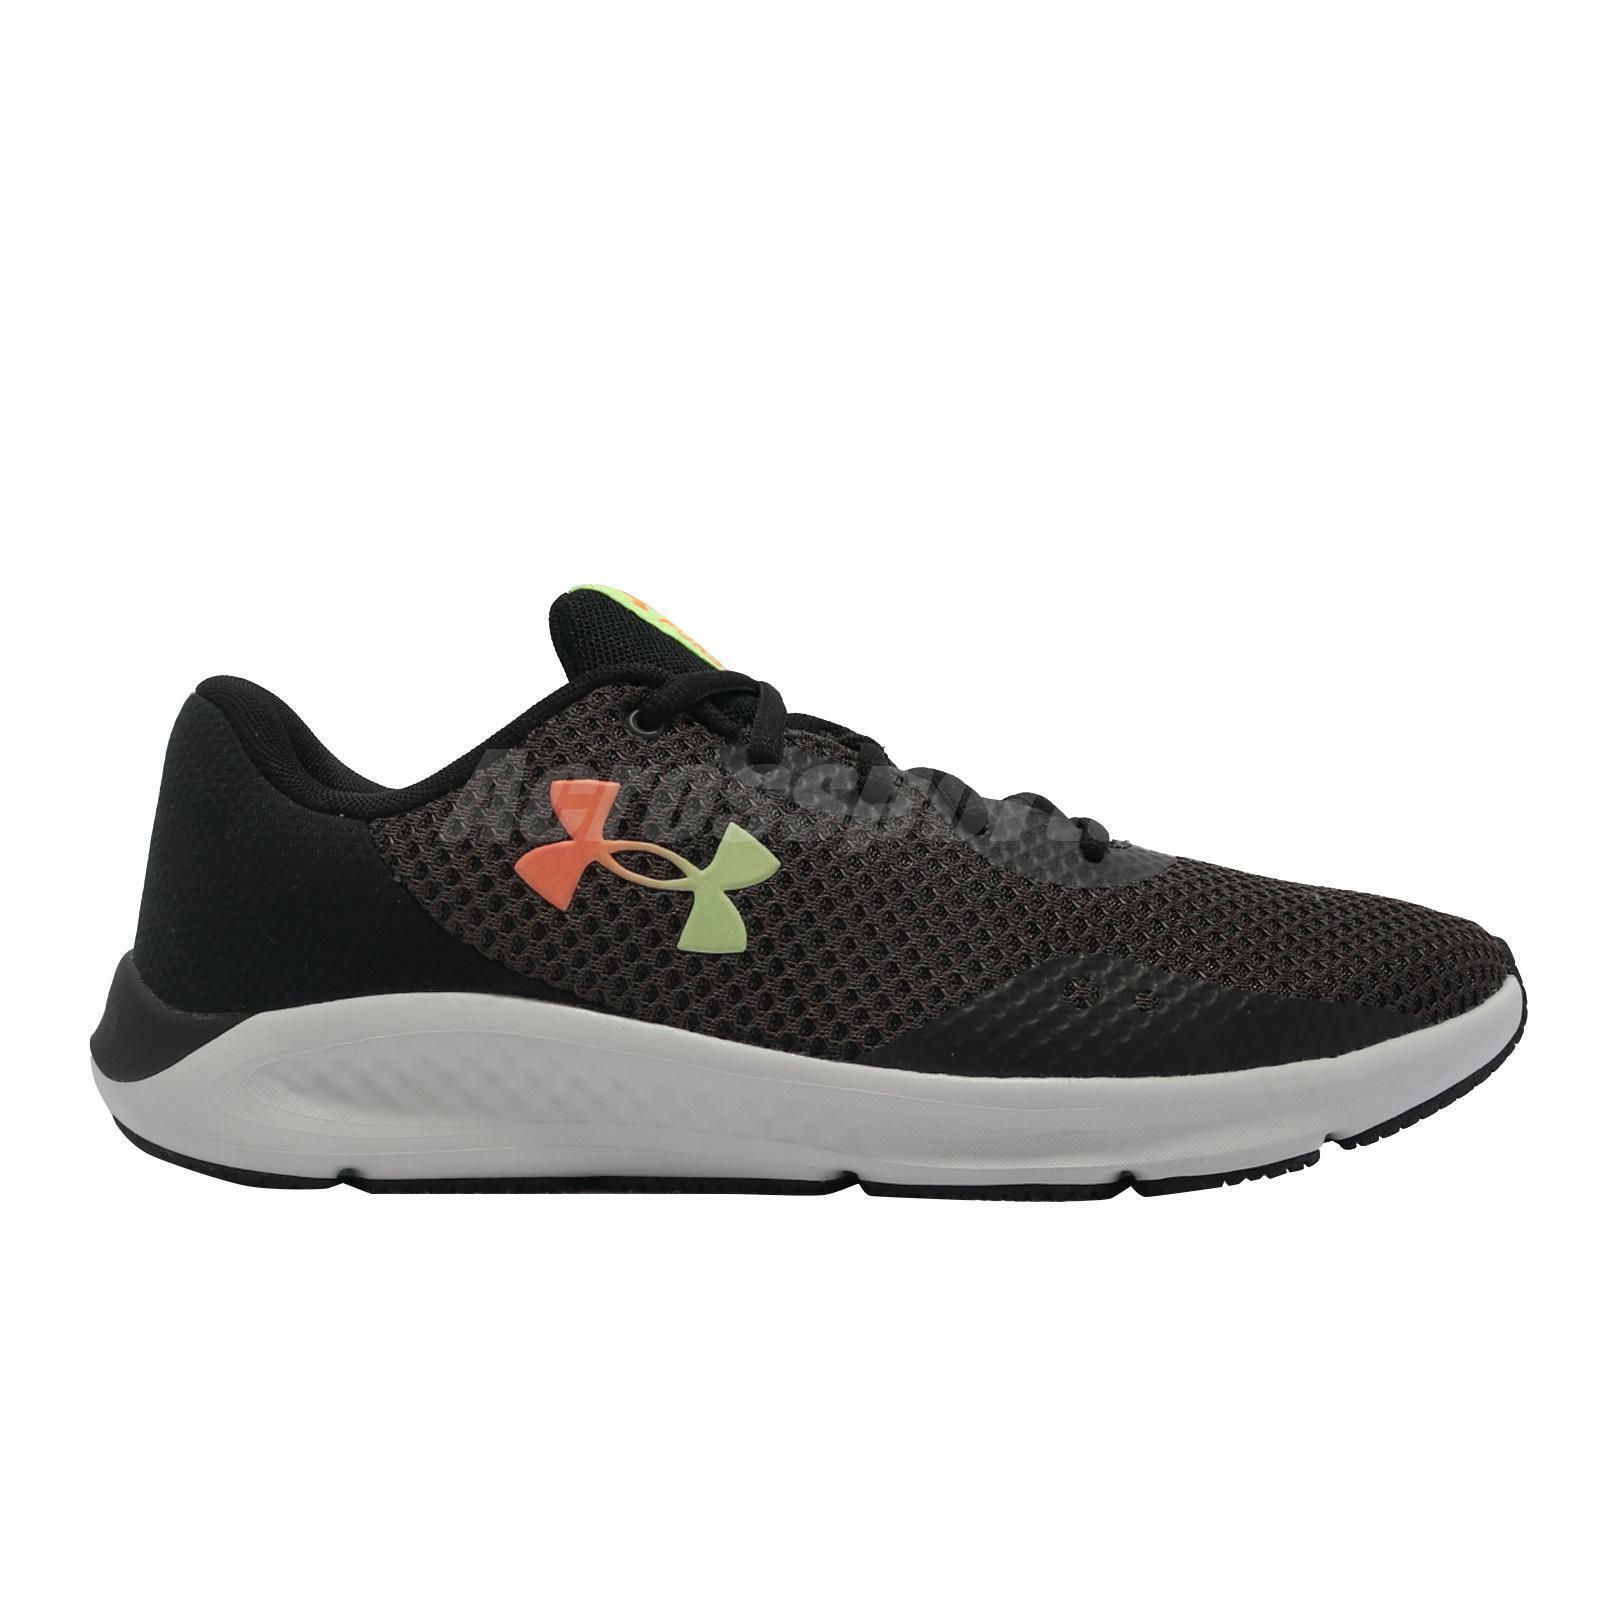 Under Armour Charged Pursuit 3 UA Black White Men Running Shoes 